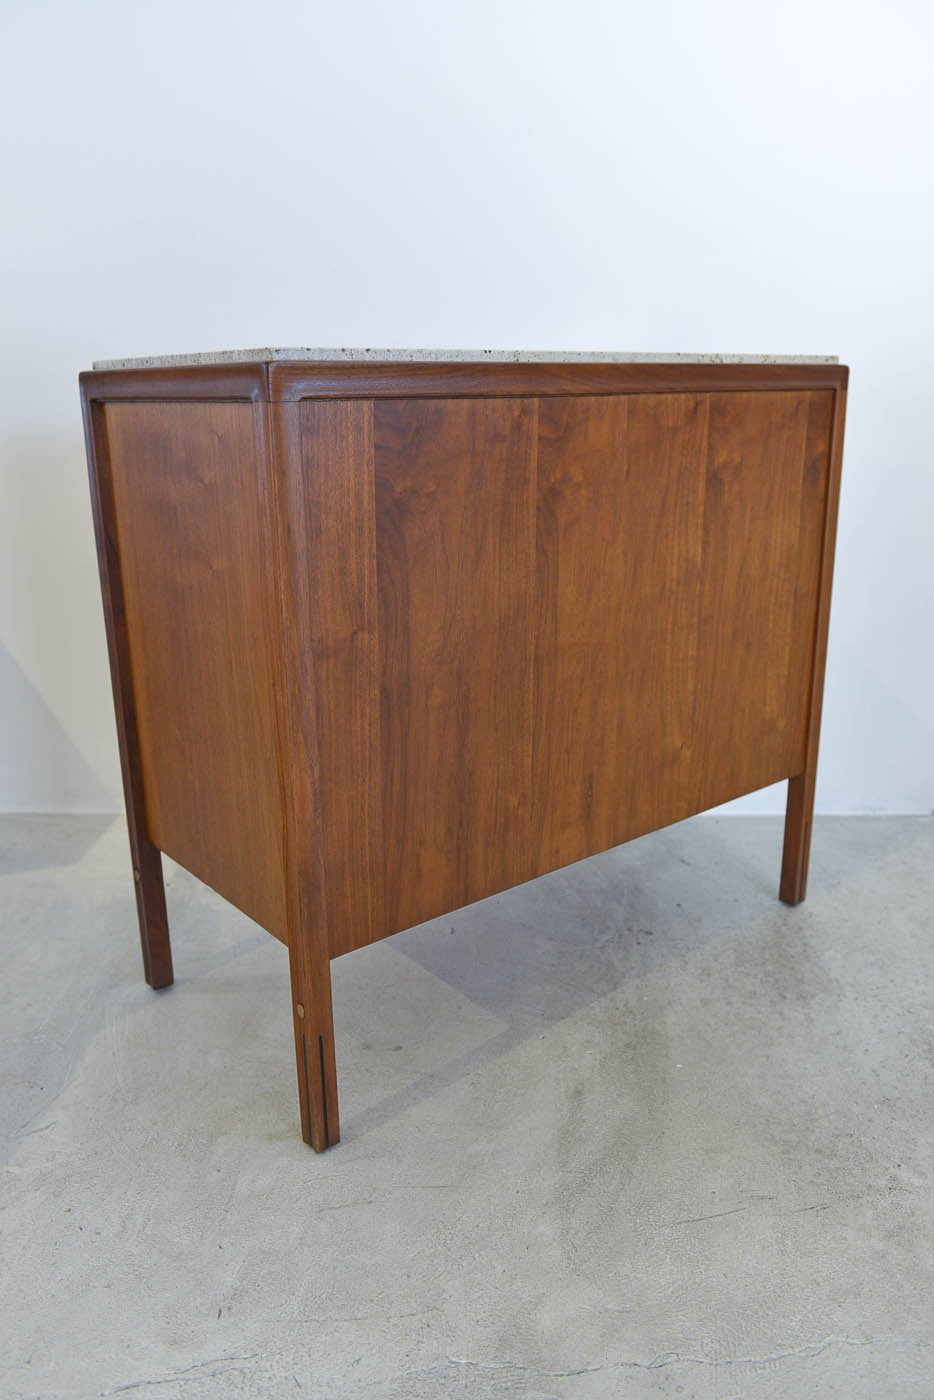 Walnut and cane cabinet with beautiful italian travertine marble top by Gerry Zanck for Gregori has been professionally restored in showroom perfect condition. The cane front has beautiful brass accents as well as the legs. Cane is perfect with no